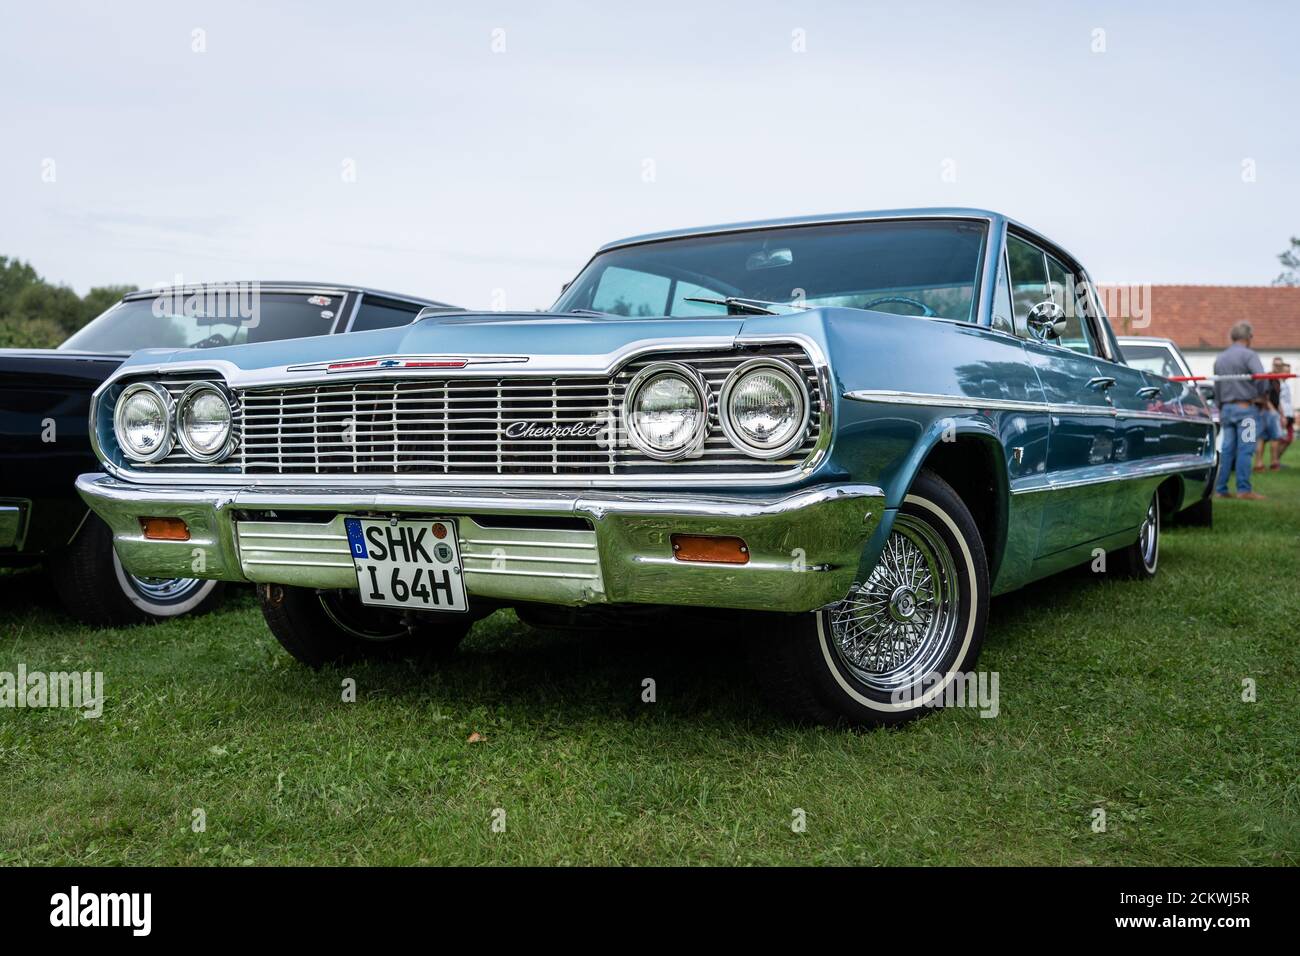 DIEDERSDORF, GERMANY - AUGUST 30, 2020: The full-size car Chevrolet Impala, 1964. The exhibition of 'US Car Classics'. Stock Photo